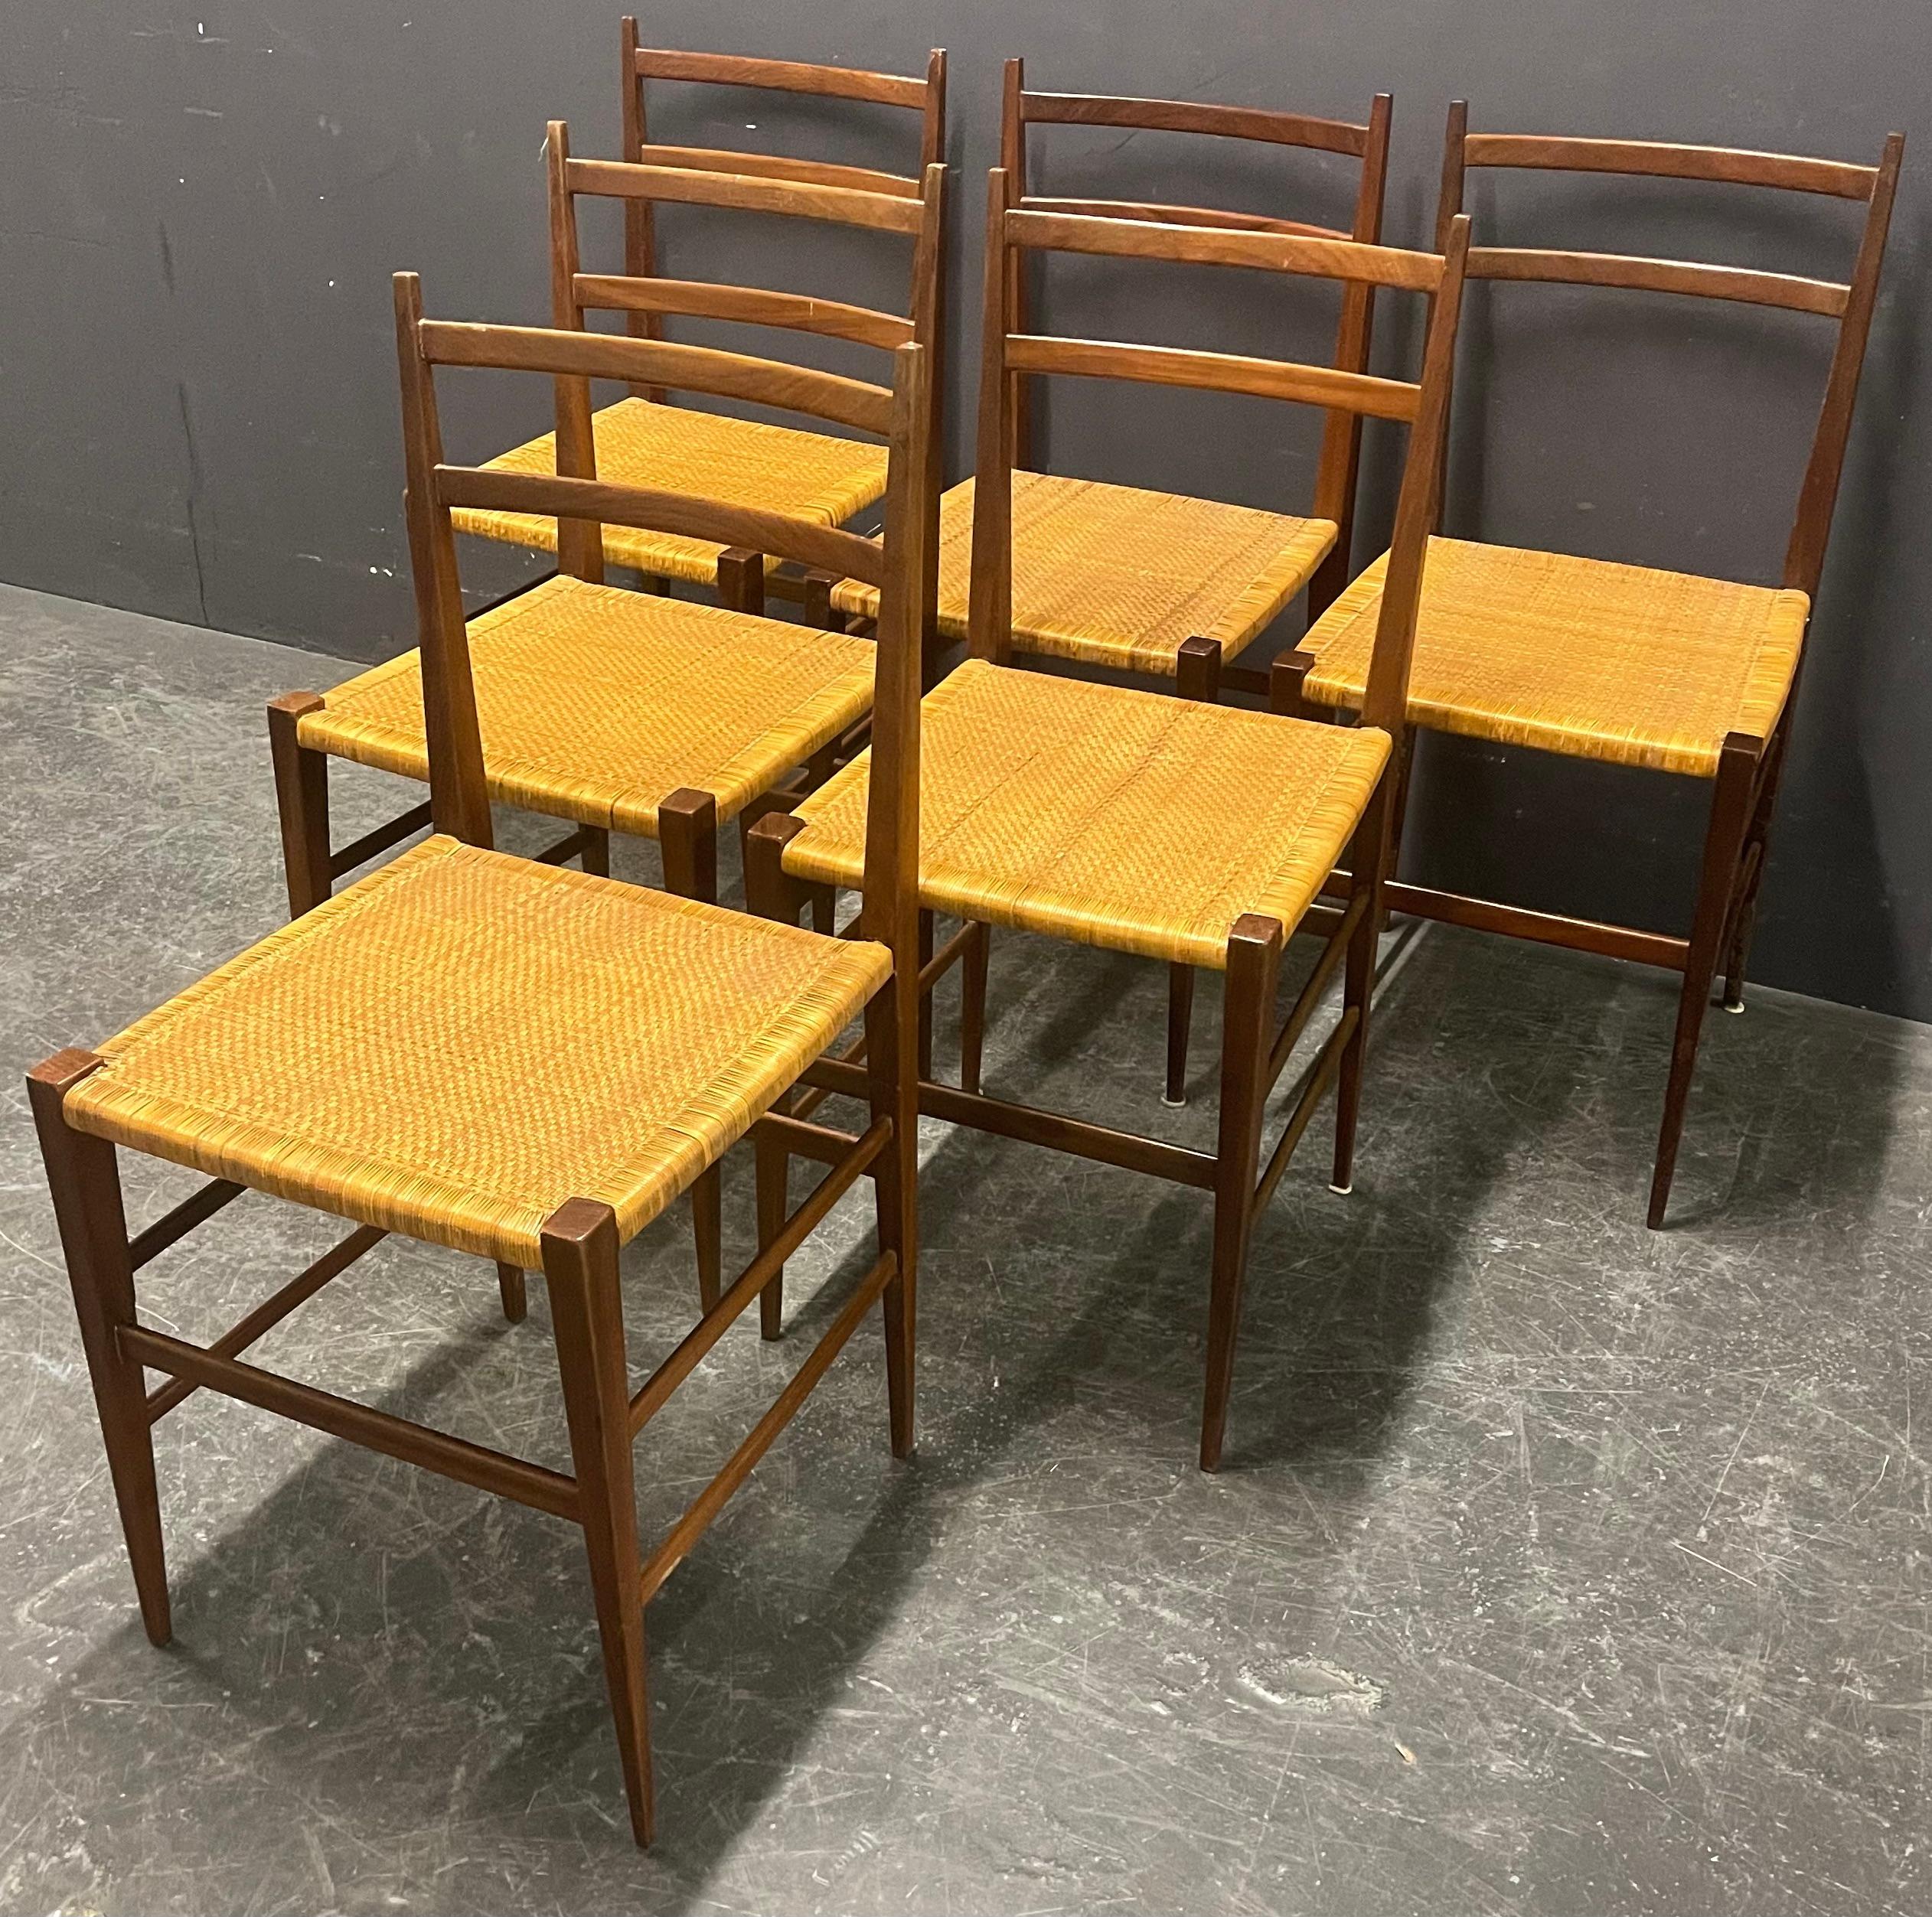 very light and minimalistic chiavari chairs. these clear lines have a few elements, that can be seen in quite a few gio ponti designs.